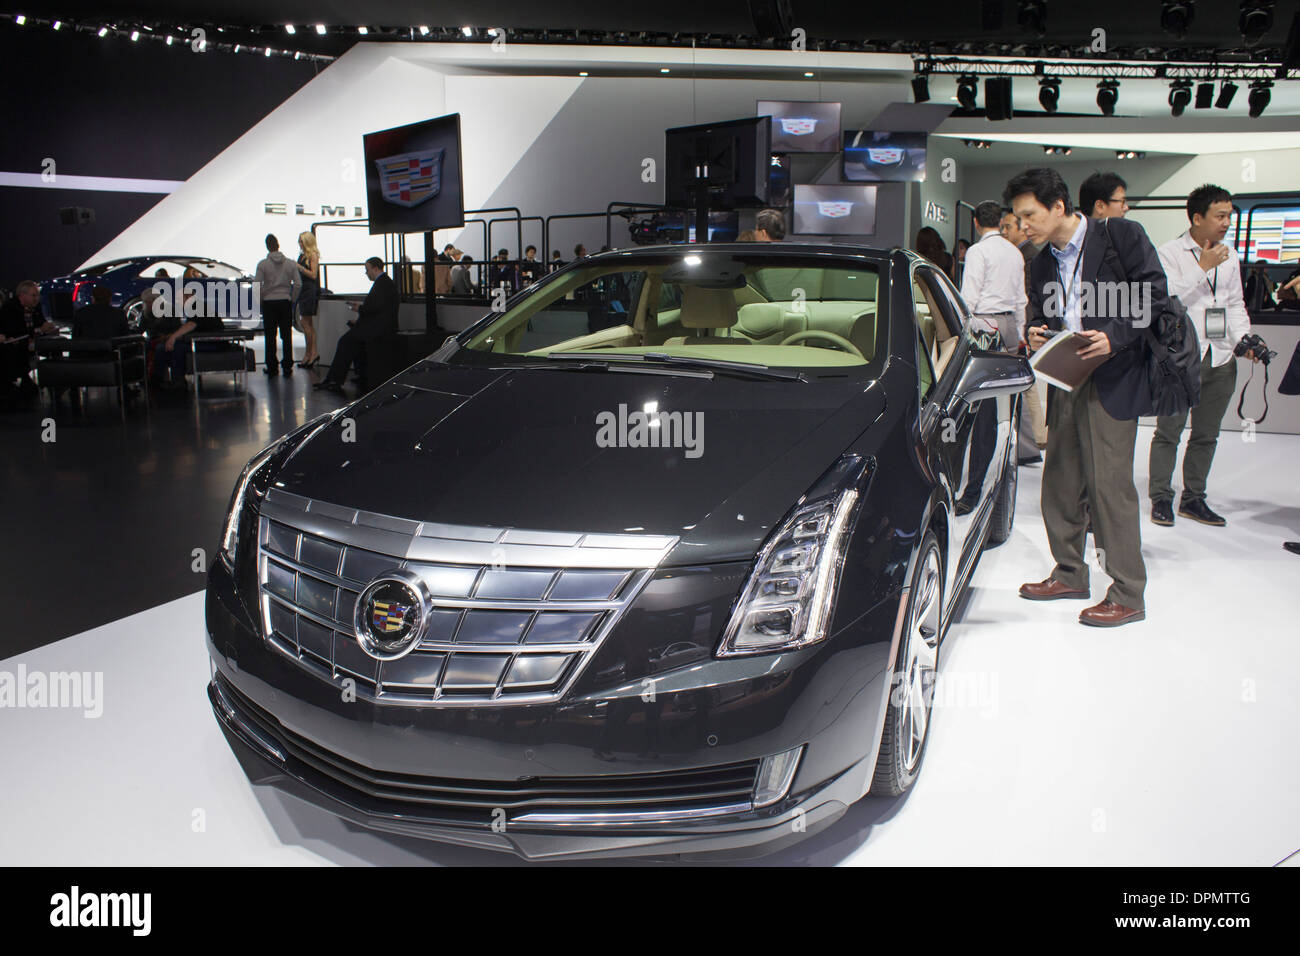 Detroit, Michigan - The Cadillac ELR electric car on display at the North American International Auto Show. Stock Photo